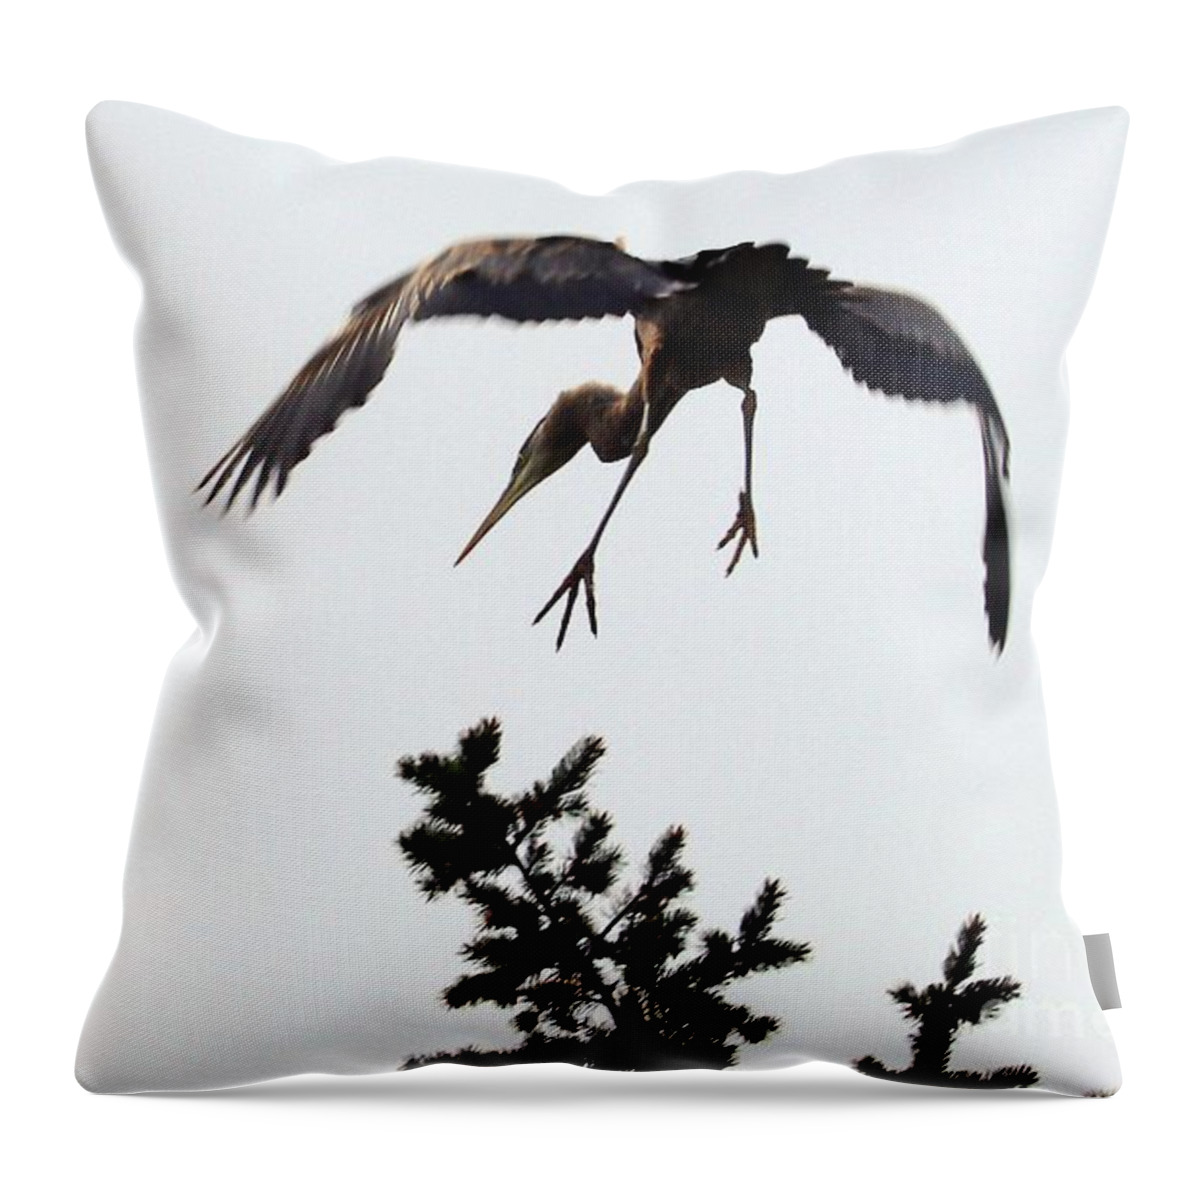 Heron Throw Pillow featuring the photograph Such Grace by Kimberly Furey